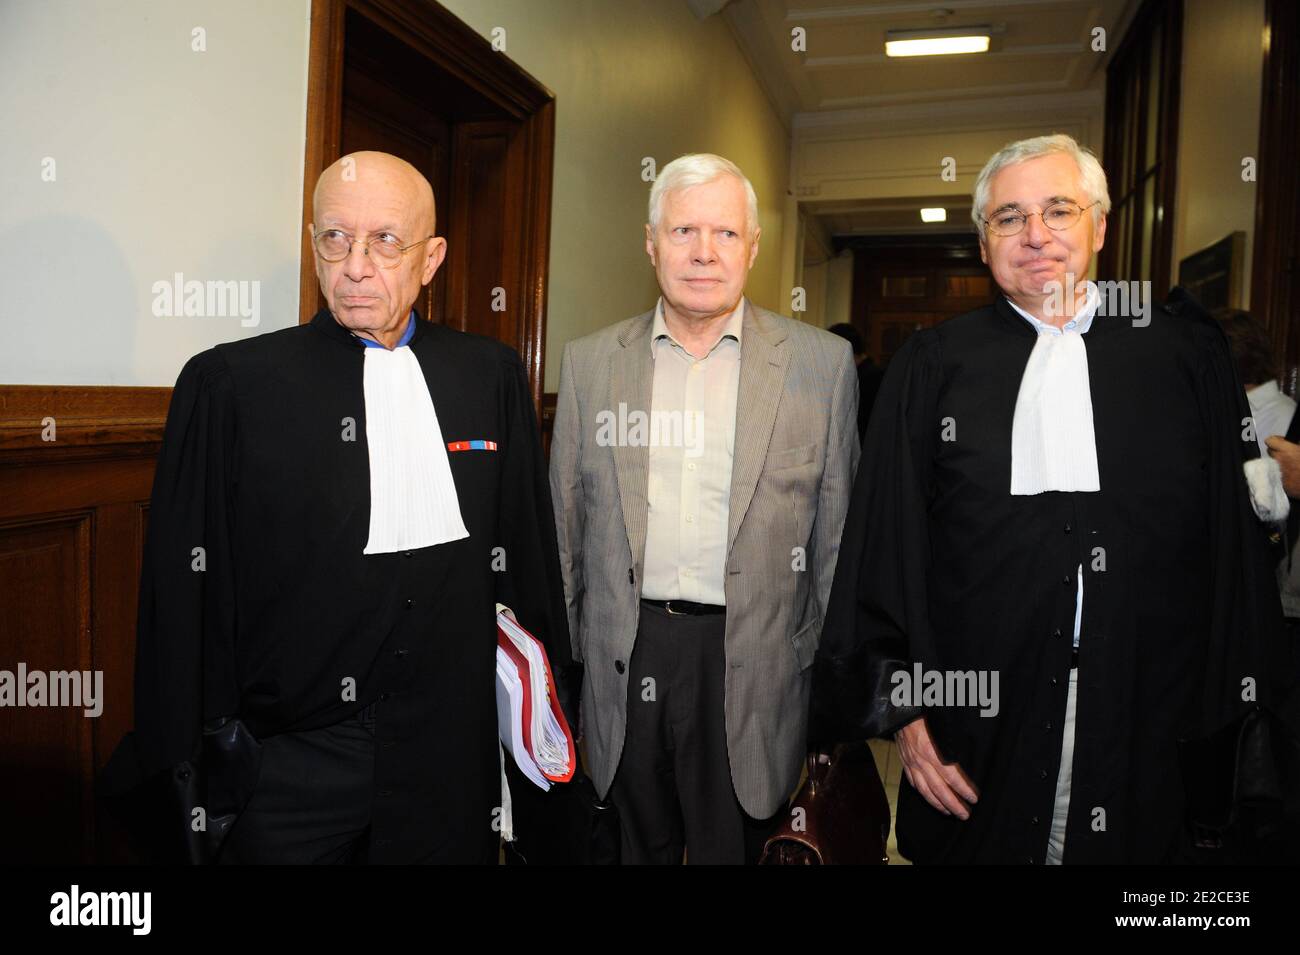 FFrenchman Andre Bamberski arrives with his lawyers Francois Gibault and Laurent de Caunes at the Palais de Justice for German cardiologist Dieter Krombach's trial for the murder of Kalinka Bamberski, in Paris, France on October 4, 2011. The French court today decided to continue the trial of the German doctor, who is accused of having raped and killed his then 14-year-old stepdaughter, Kalinka Bamberski, in the summer of 1982 while she was holidaying with her mother at Krombach's home at Lake Constance, southern Germany. A court in Germany ruled that Krombach could not be held responsible for Stock Photo